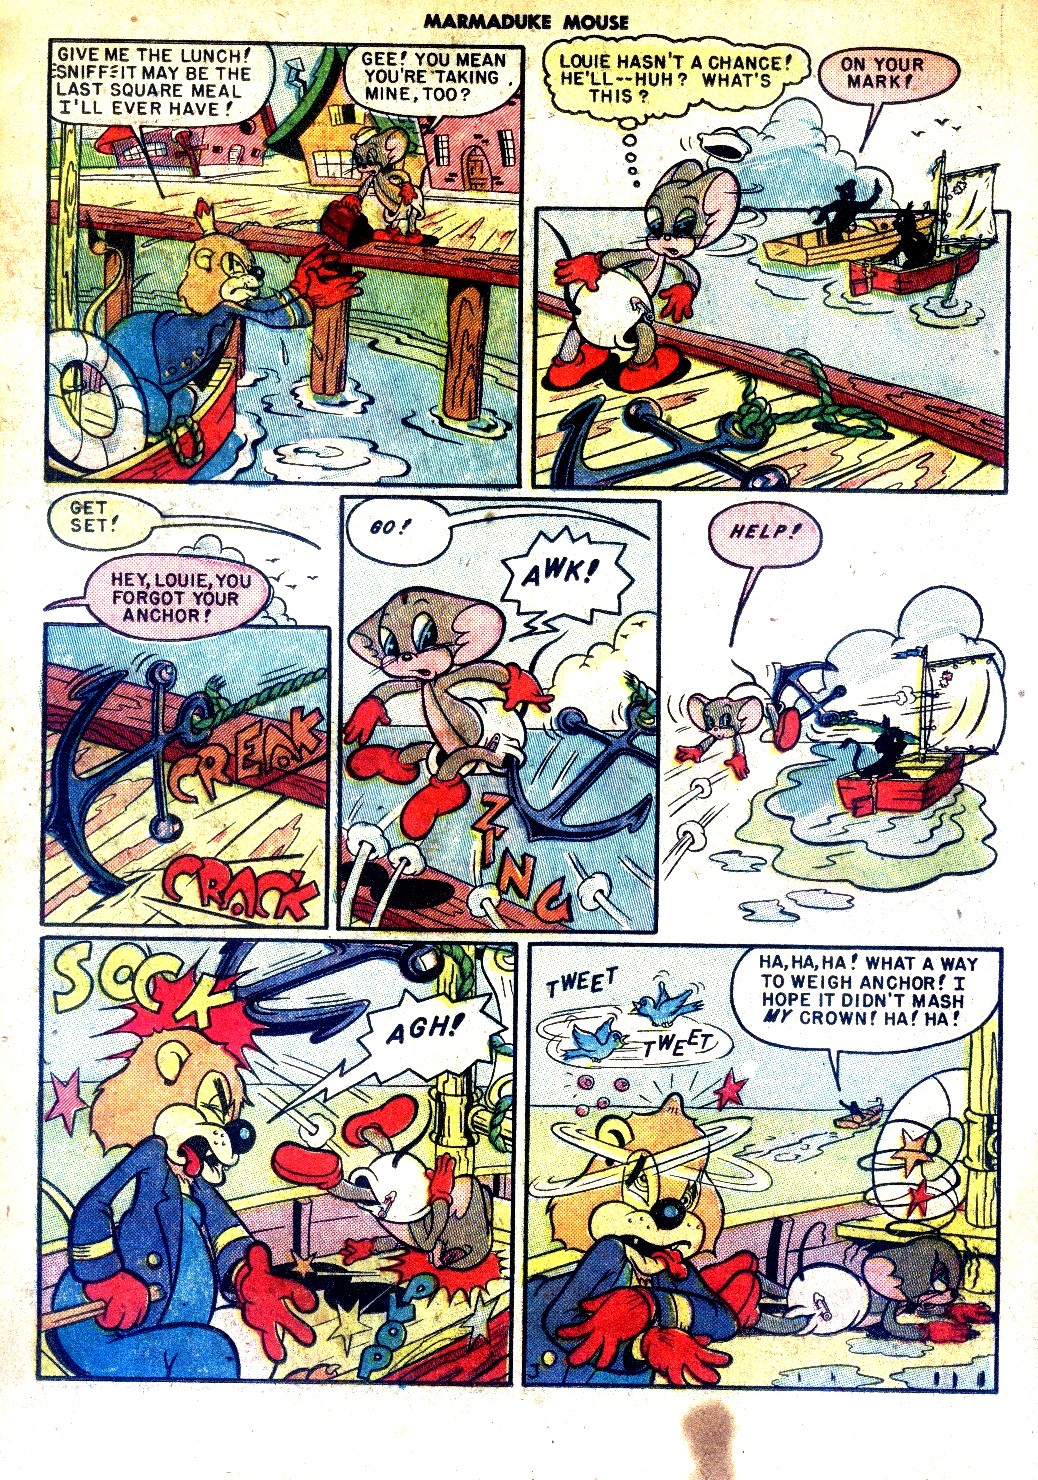 Read online Marmaduke Mouse comic -  Issue #17 - 18